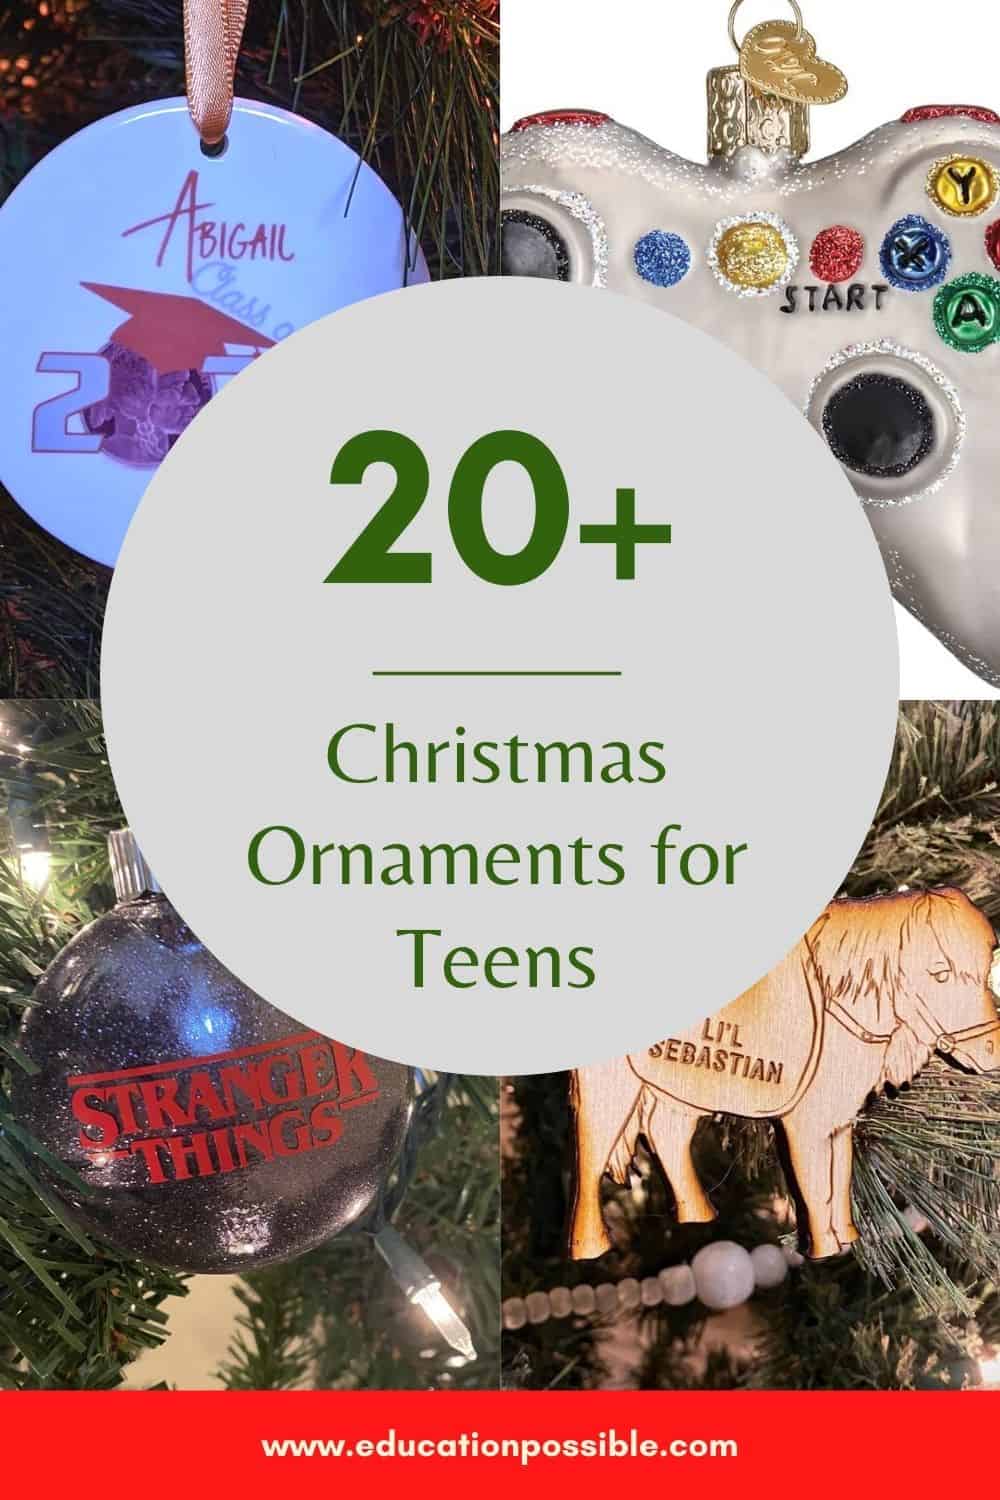 The Best Christmas Ornaments for Teens That Make Awesome Gifts